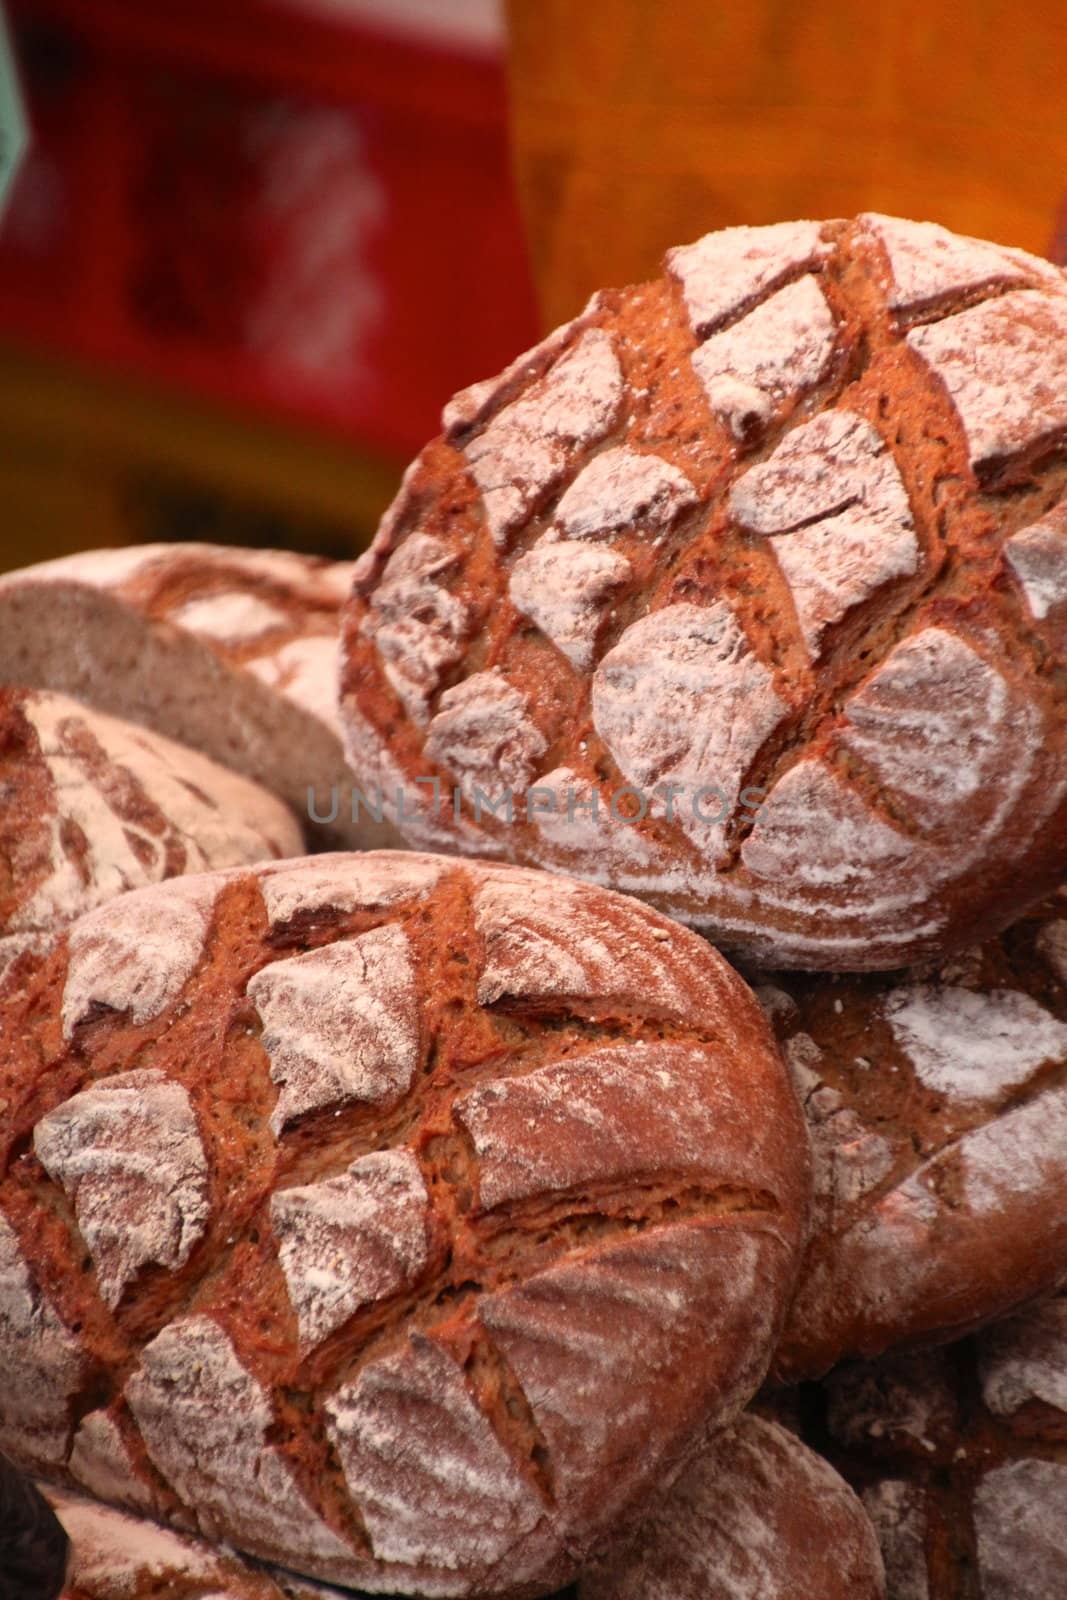 Bread made from white flour on the market